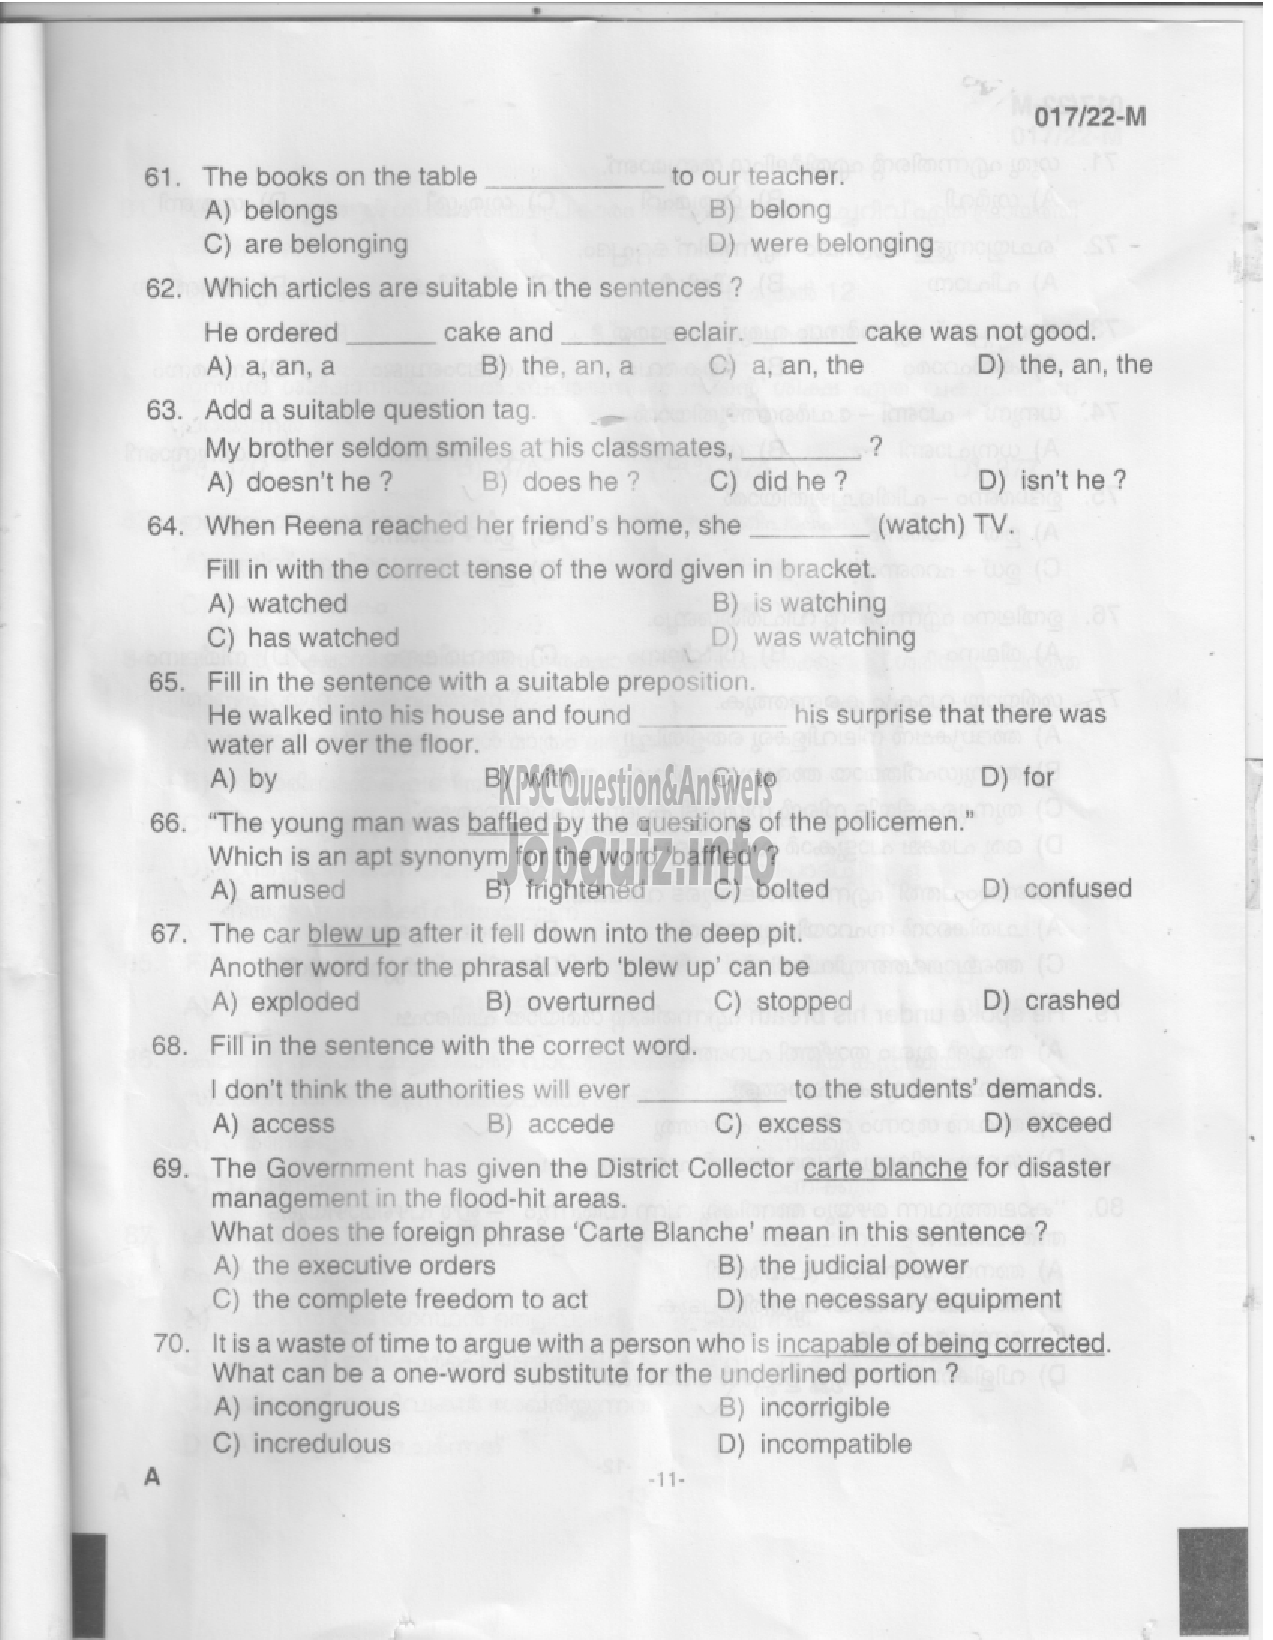 Kerala PSC Question Paper -  Police Constable, Women Police Constable, Armed Police ASI etc-POLICE DEPARTMENT  -9